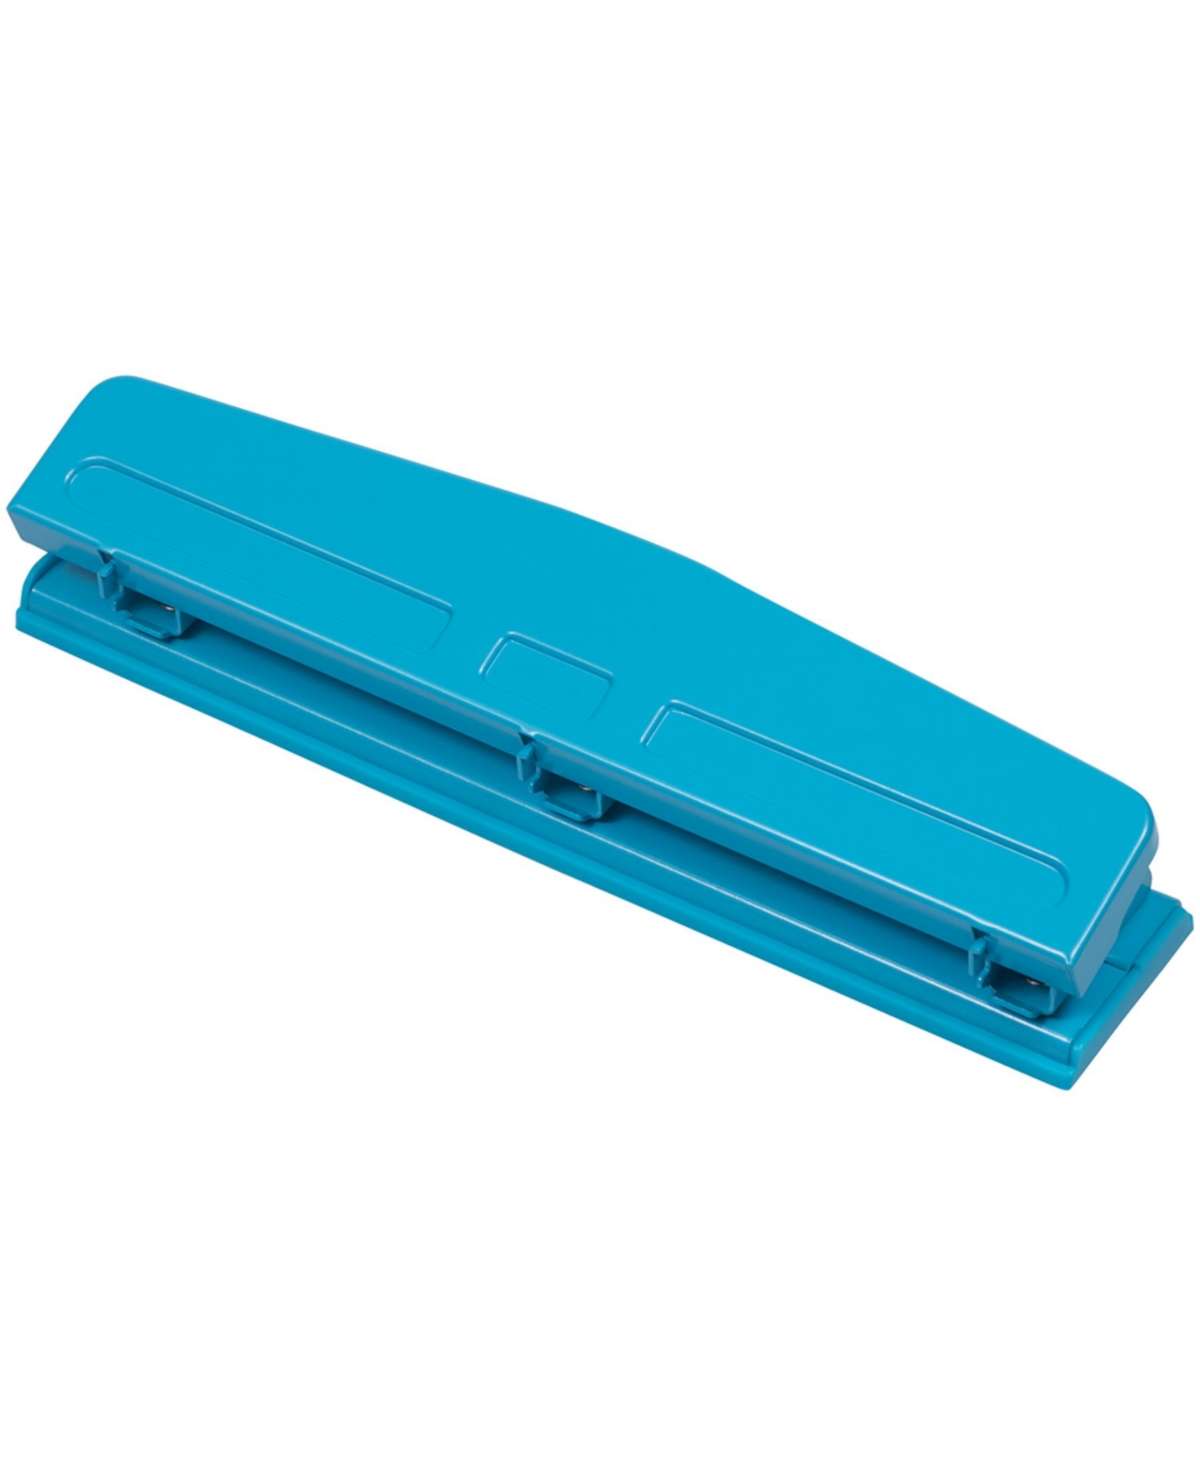 Metal 3 Hole Punch - 10 Sheet Capacity - Hole Puncher Sold Individually - Blue